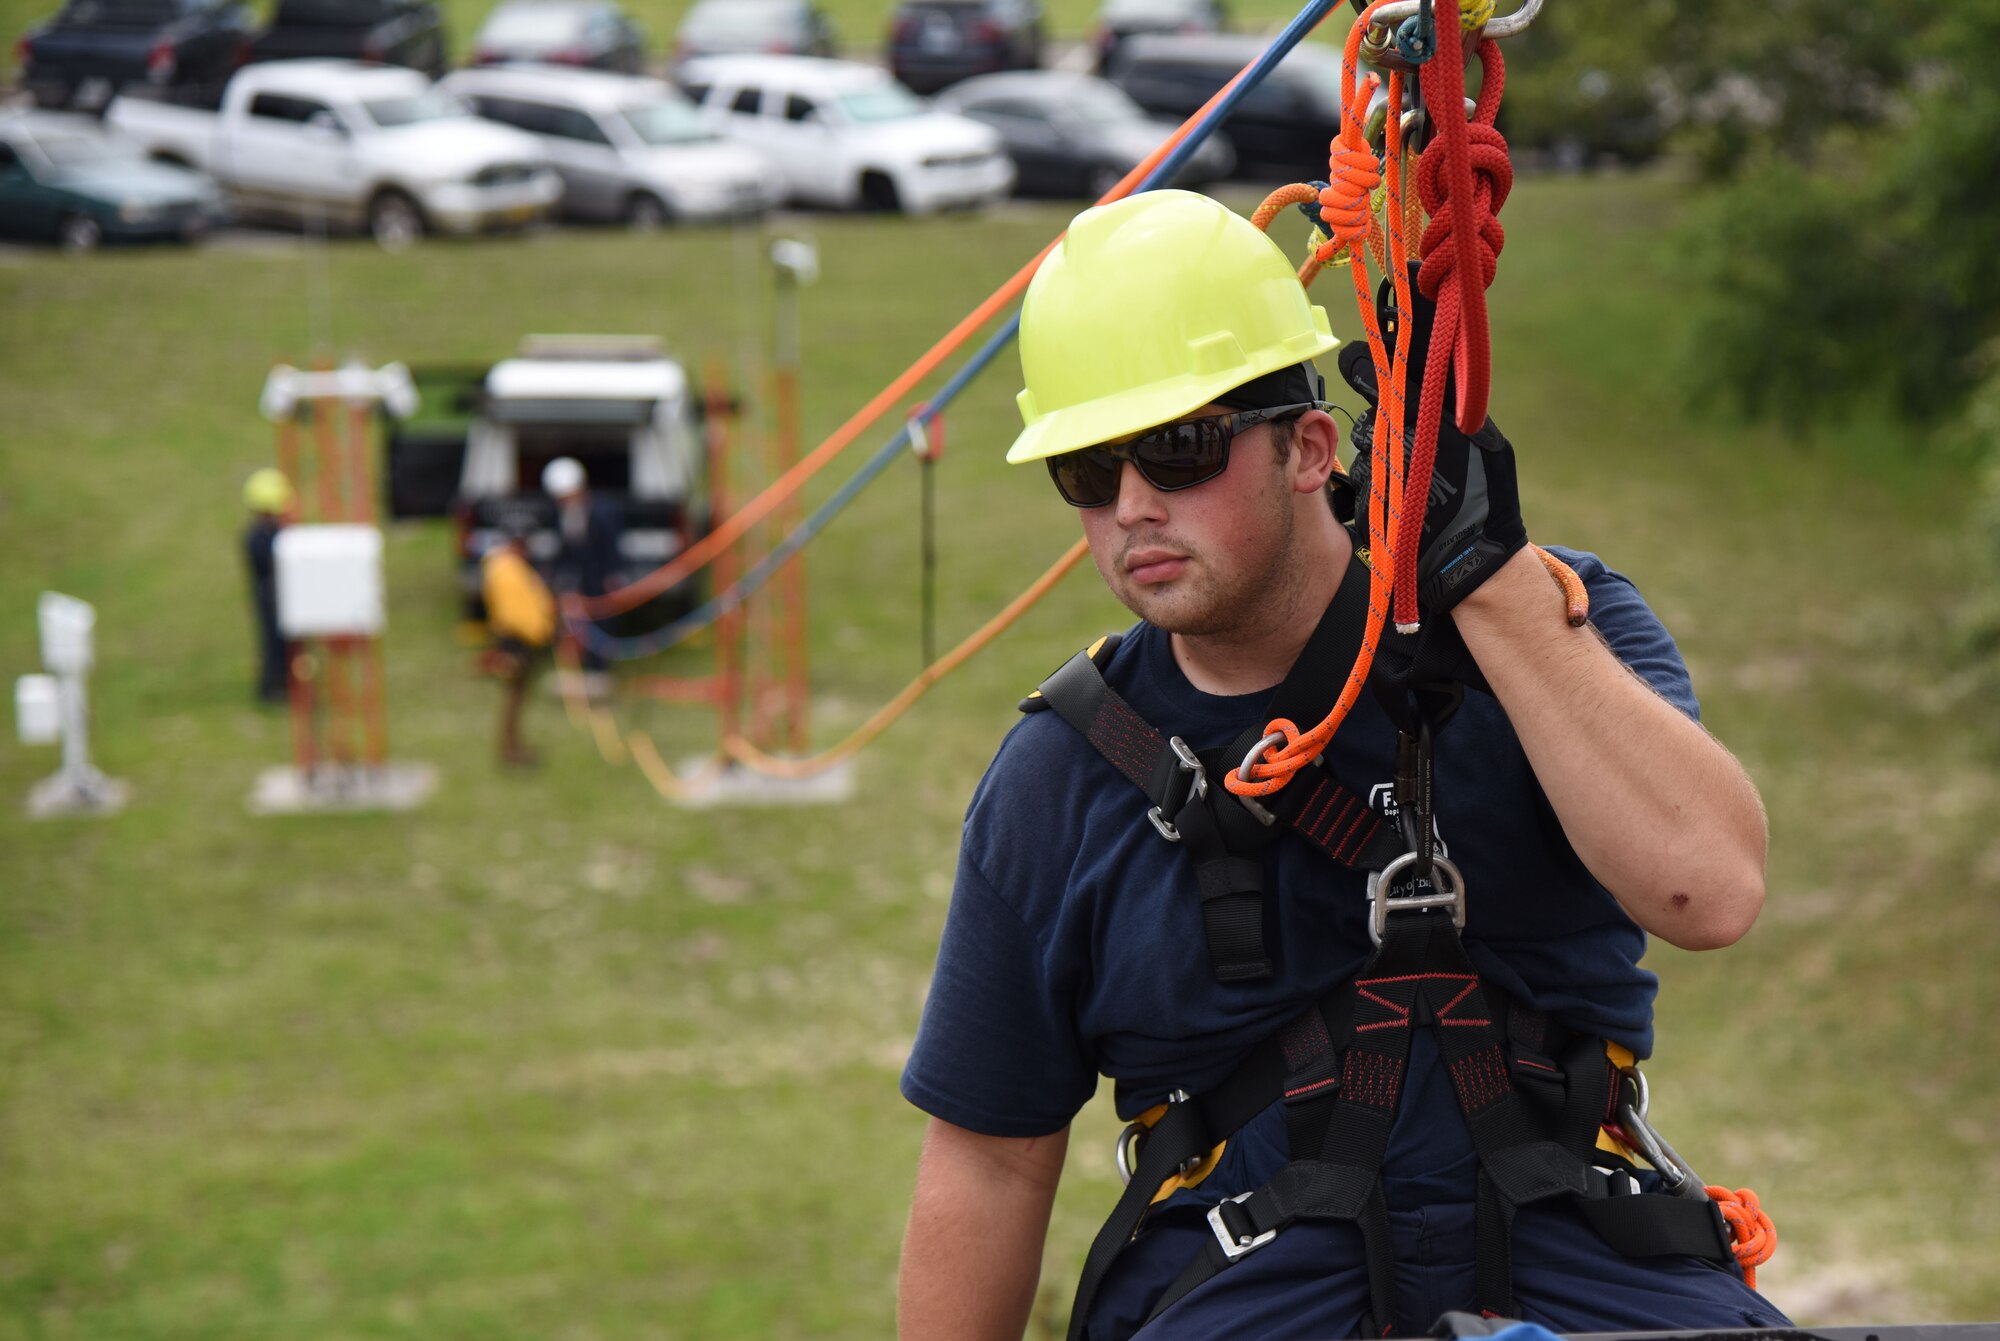 Taylor Beesley, Biloxi Firefighter, participates in a controlled descent exercise from atop of the Weather Training Complex during rope rescue operations training June 14, 2017, on Keesler Air Force Base, Miss. Keesler hosted the advanced rescue certification training course, which consisted of confined space rescue, high and low angle rescue and stokes basket rescue operations, for Keesler and Biloxi Firefighters. (U.S. Air Force photo by Kemberly Groue)